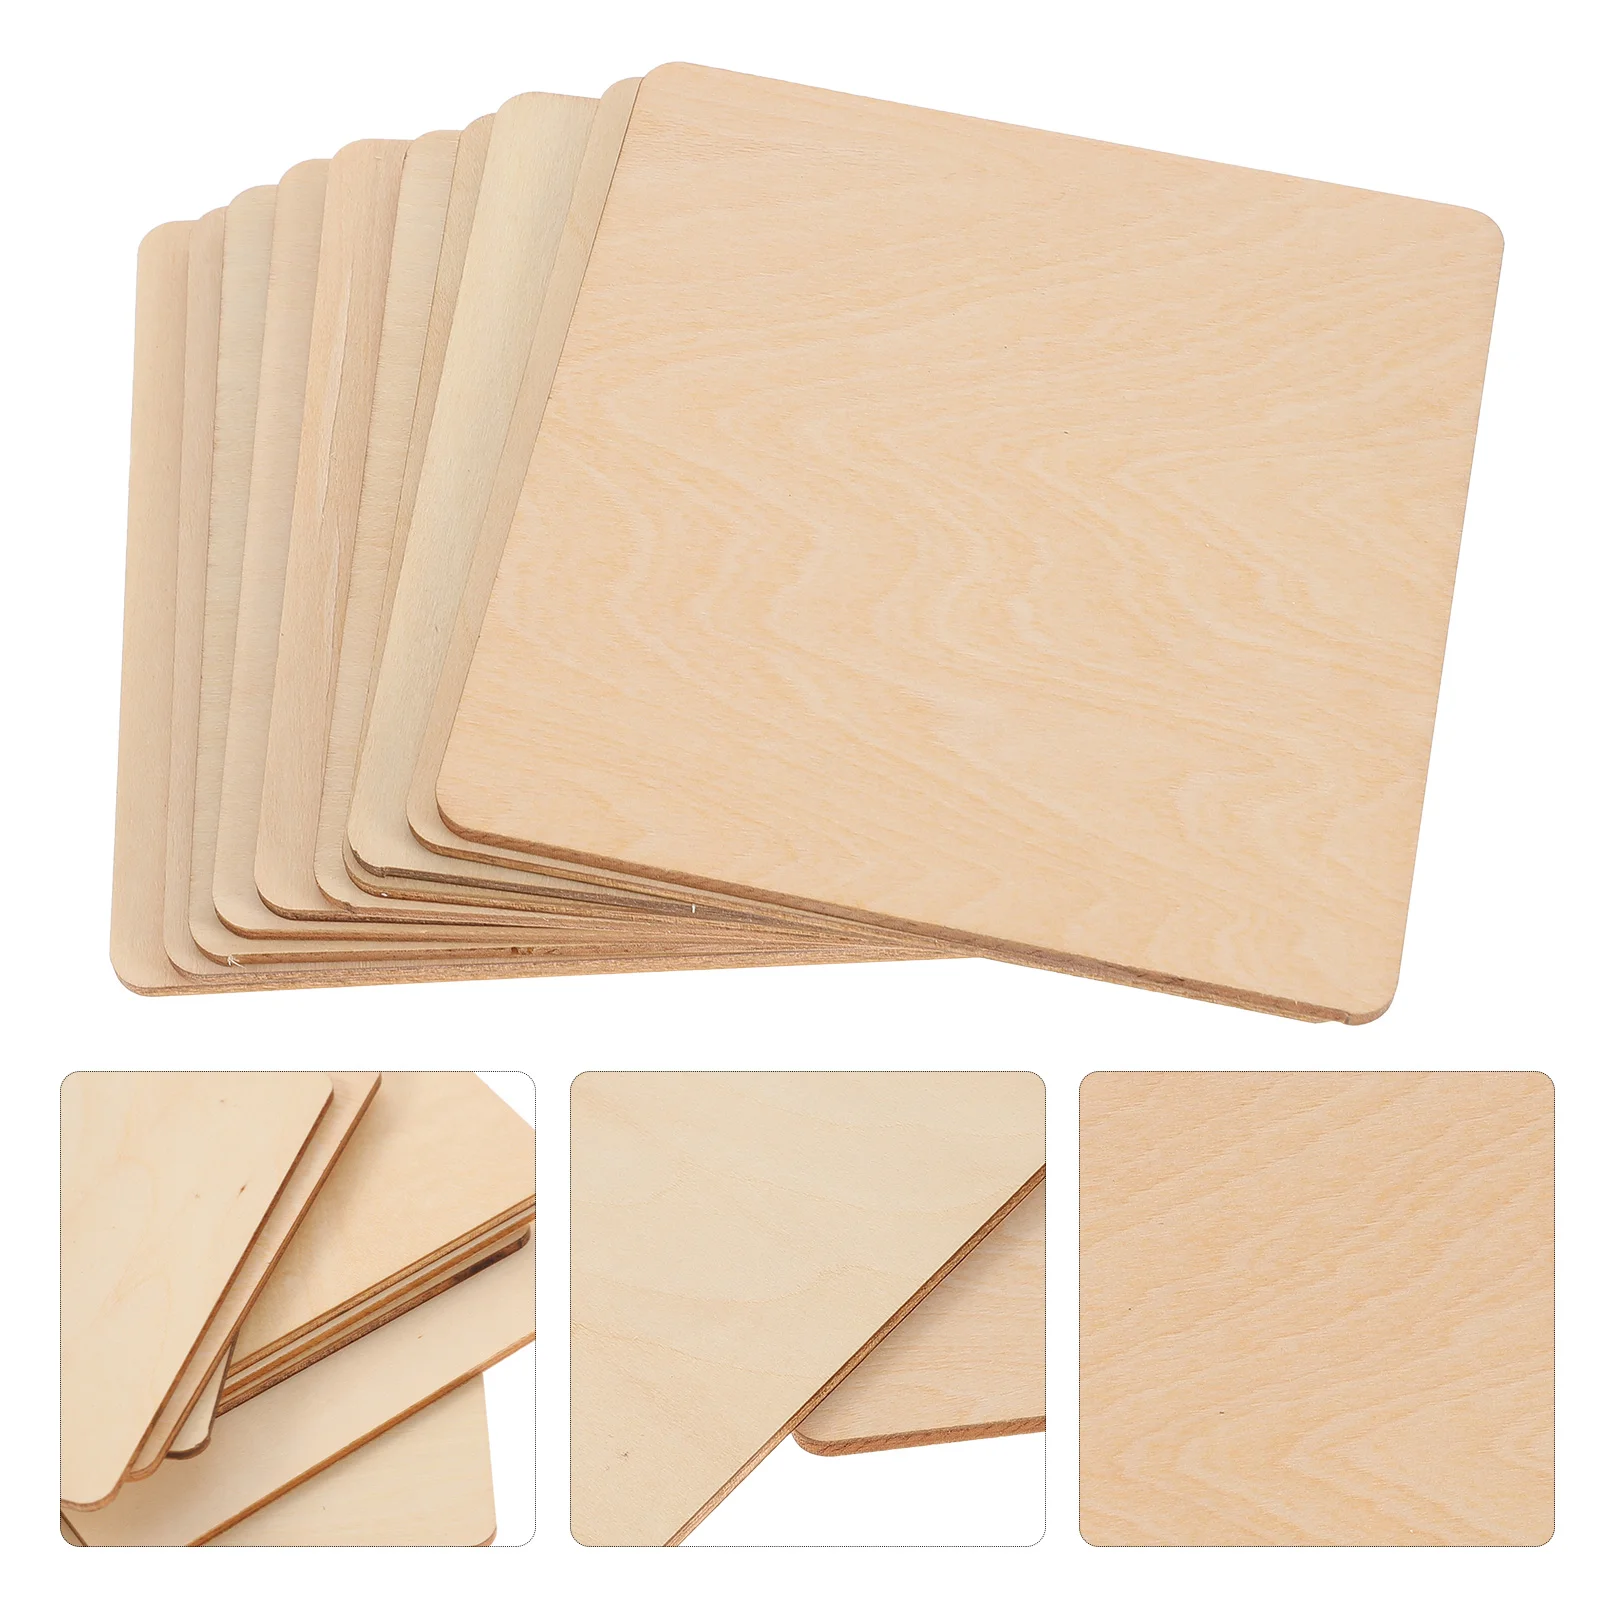 

Wood Planks Wooden Unfinished Crafts Diy Blank Materials Model Basswood Architecture Boards Sheets Slices Pieces Blanks Plain